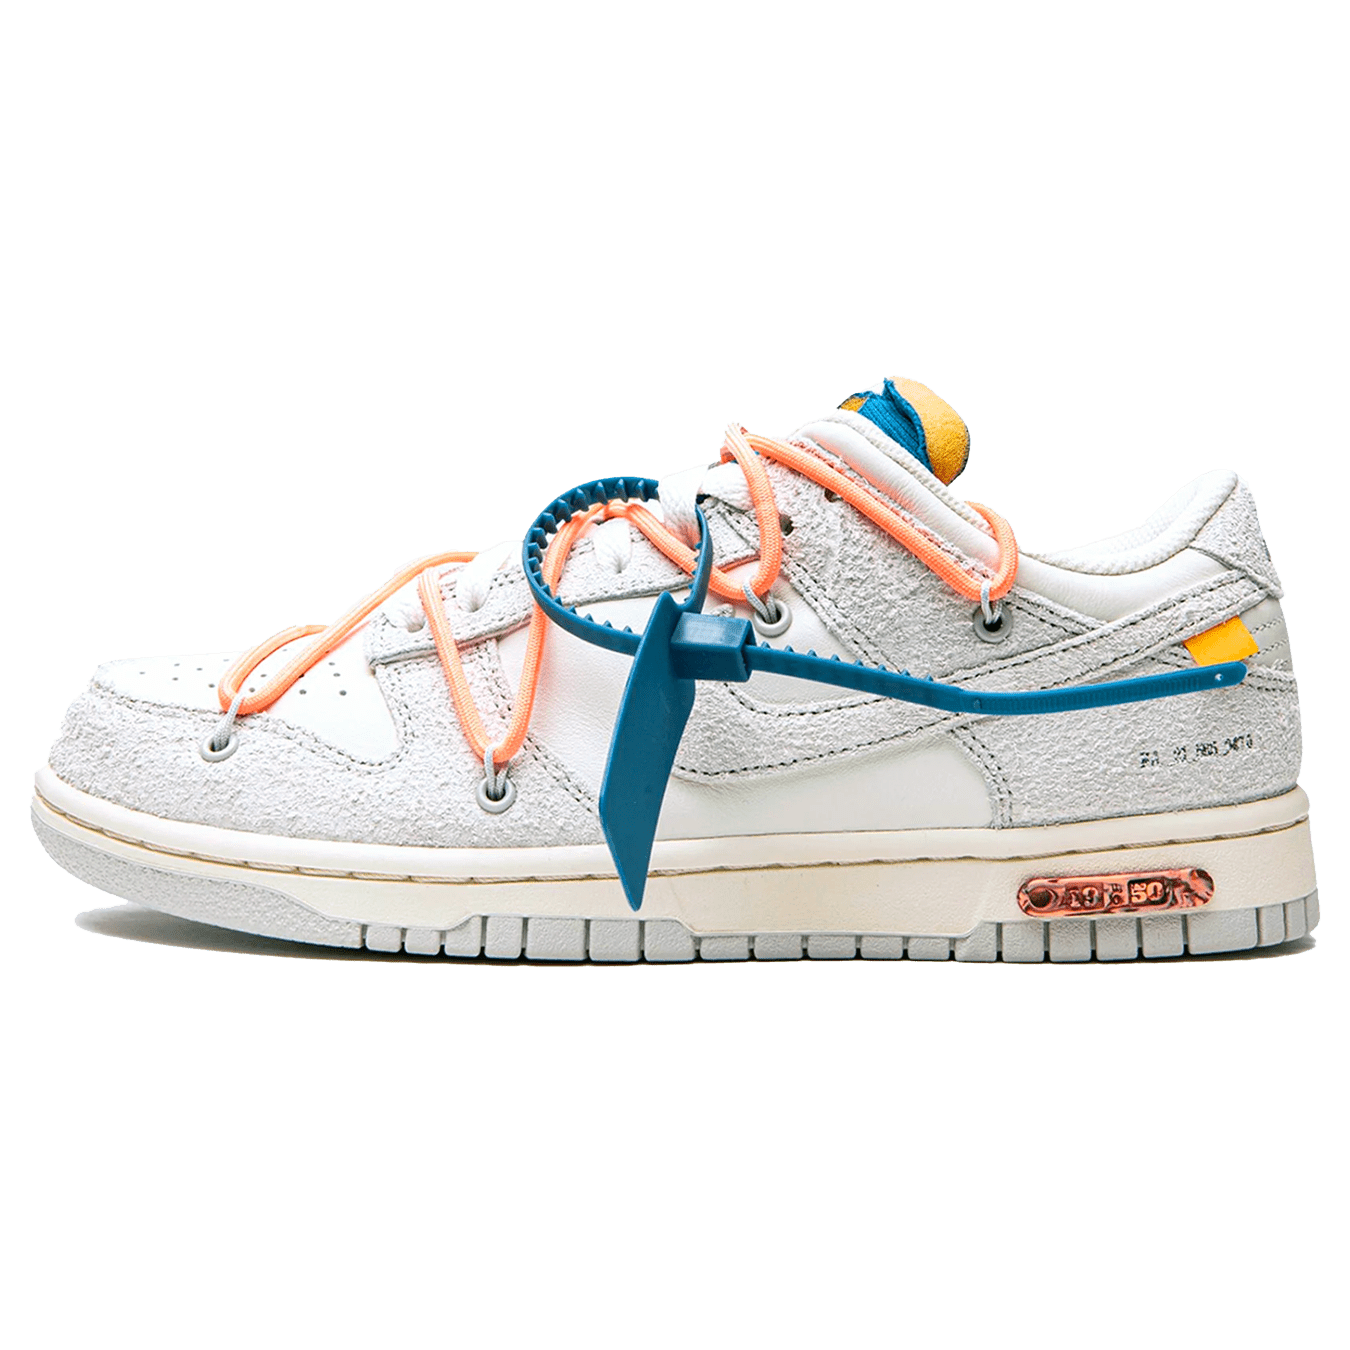 Off White x Nike Dunk Low Lot 19 of 50 DJ0950 119